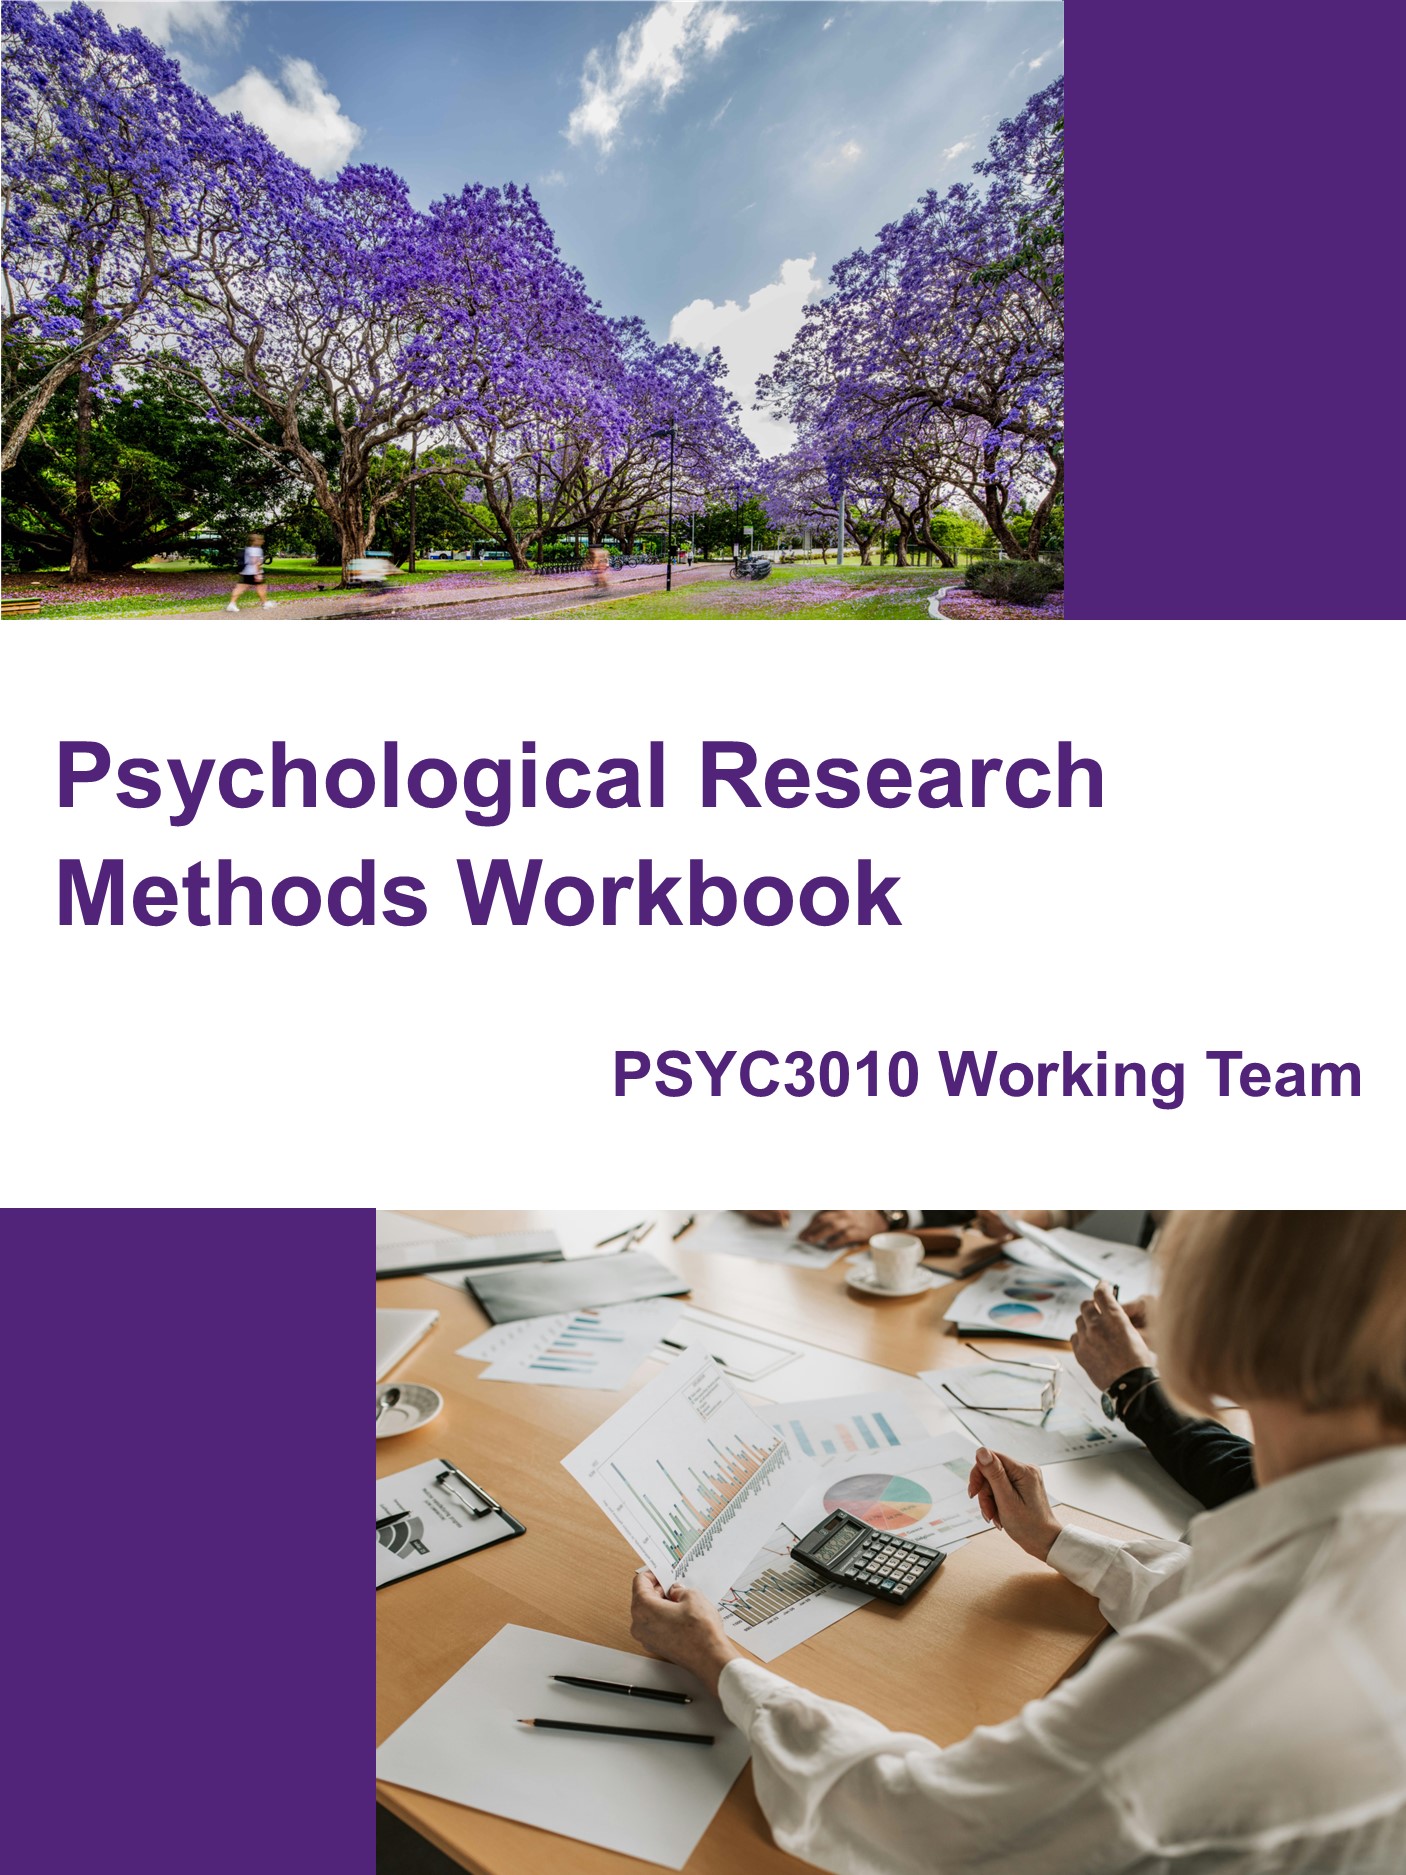 Psychological Research Methods Workbook cover. PSYC3010 Working Team